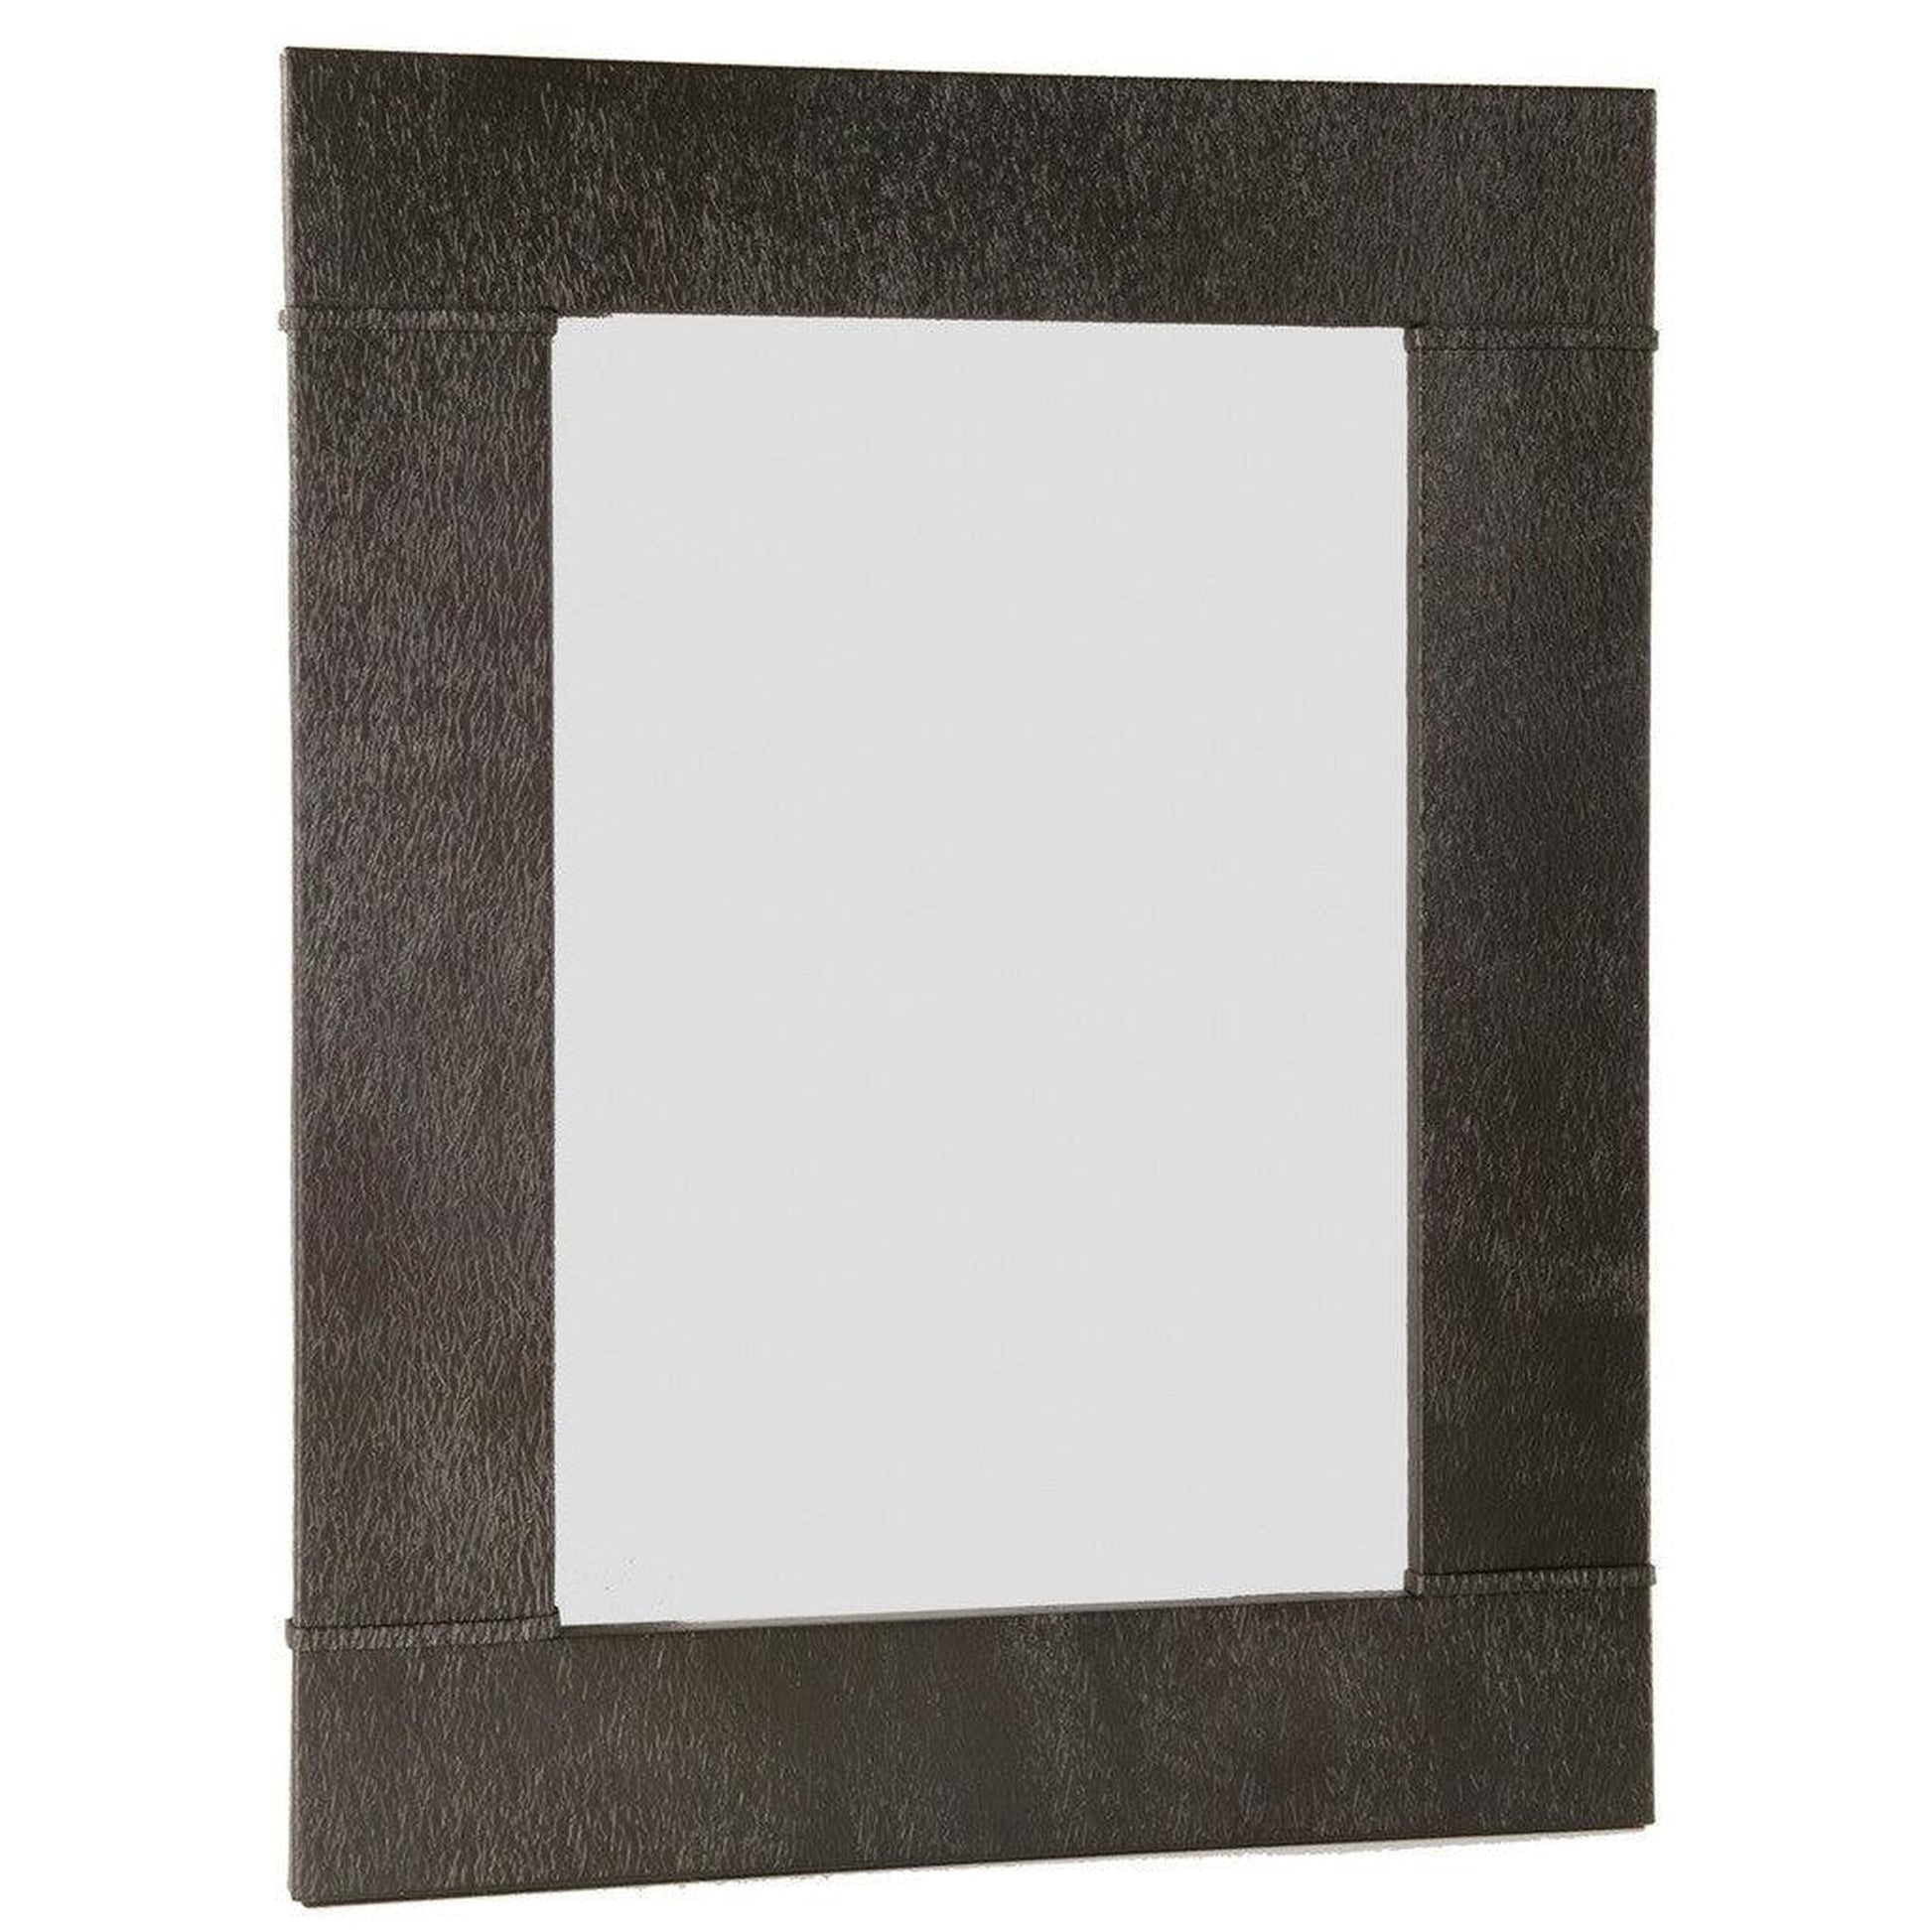 Stone County Ironworks Cedarvale 37" x 45" Large Hand Rubbed Bronze Iron Wall Mirror With Copper Iron Accent